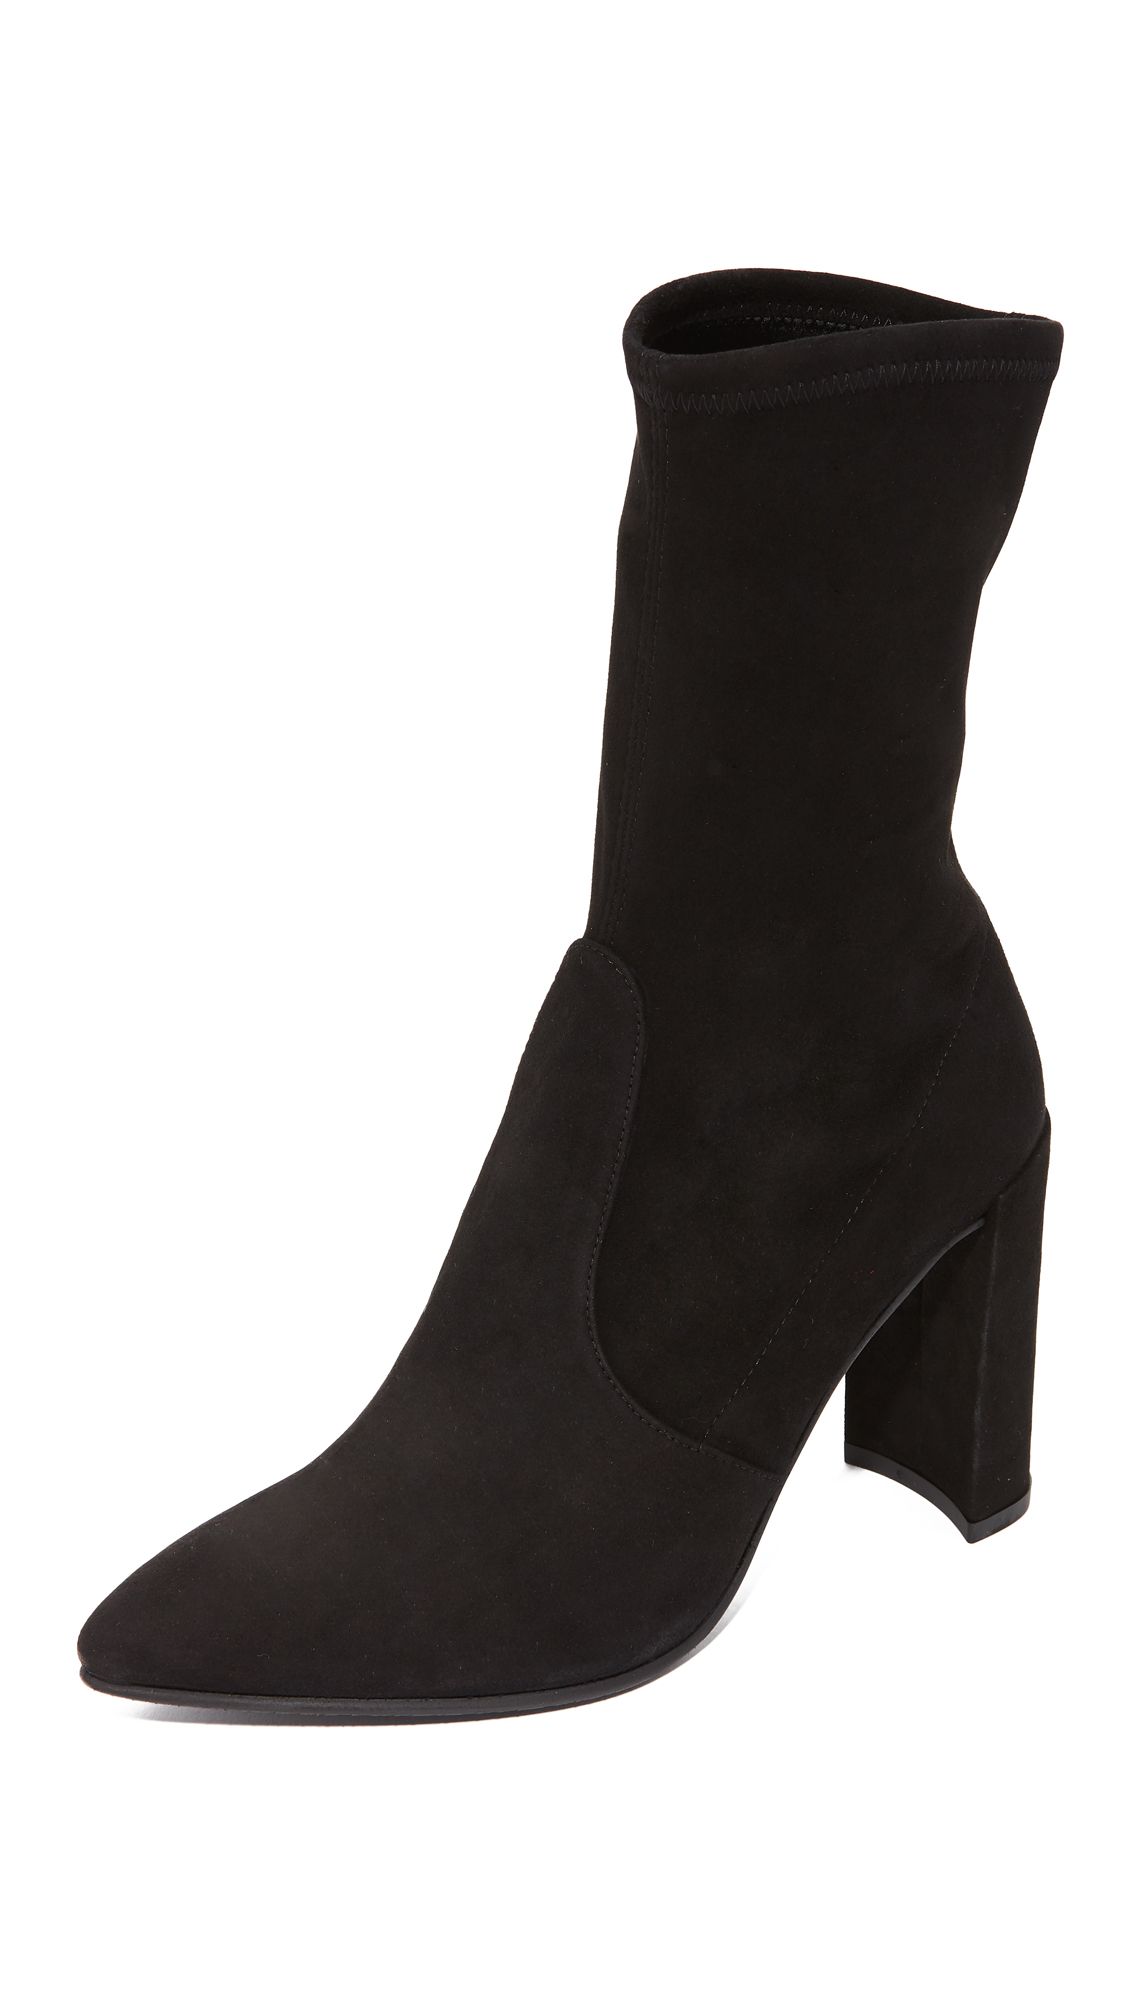 Clinger Stretch Booties | Shopbop